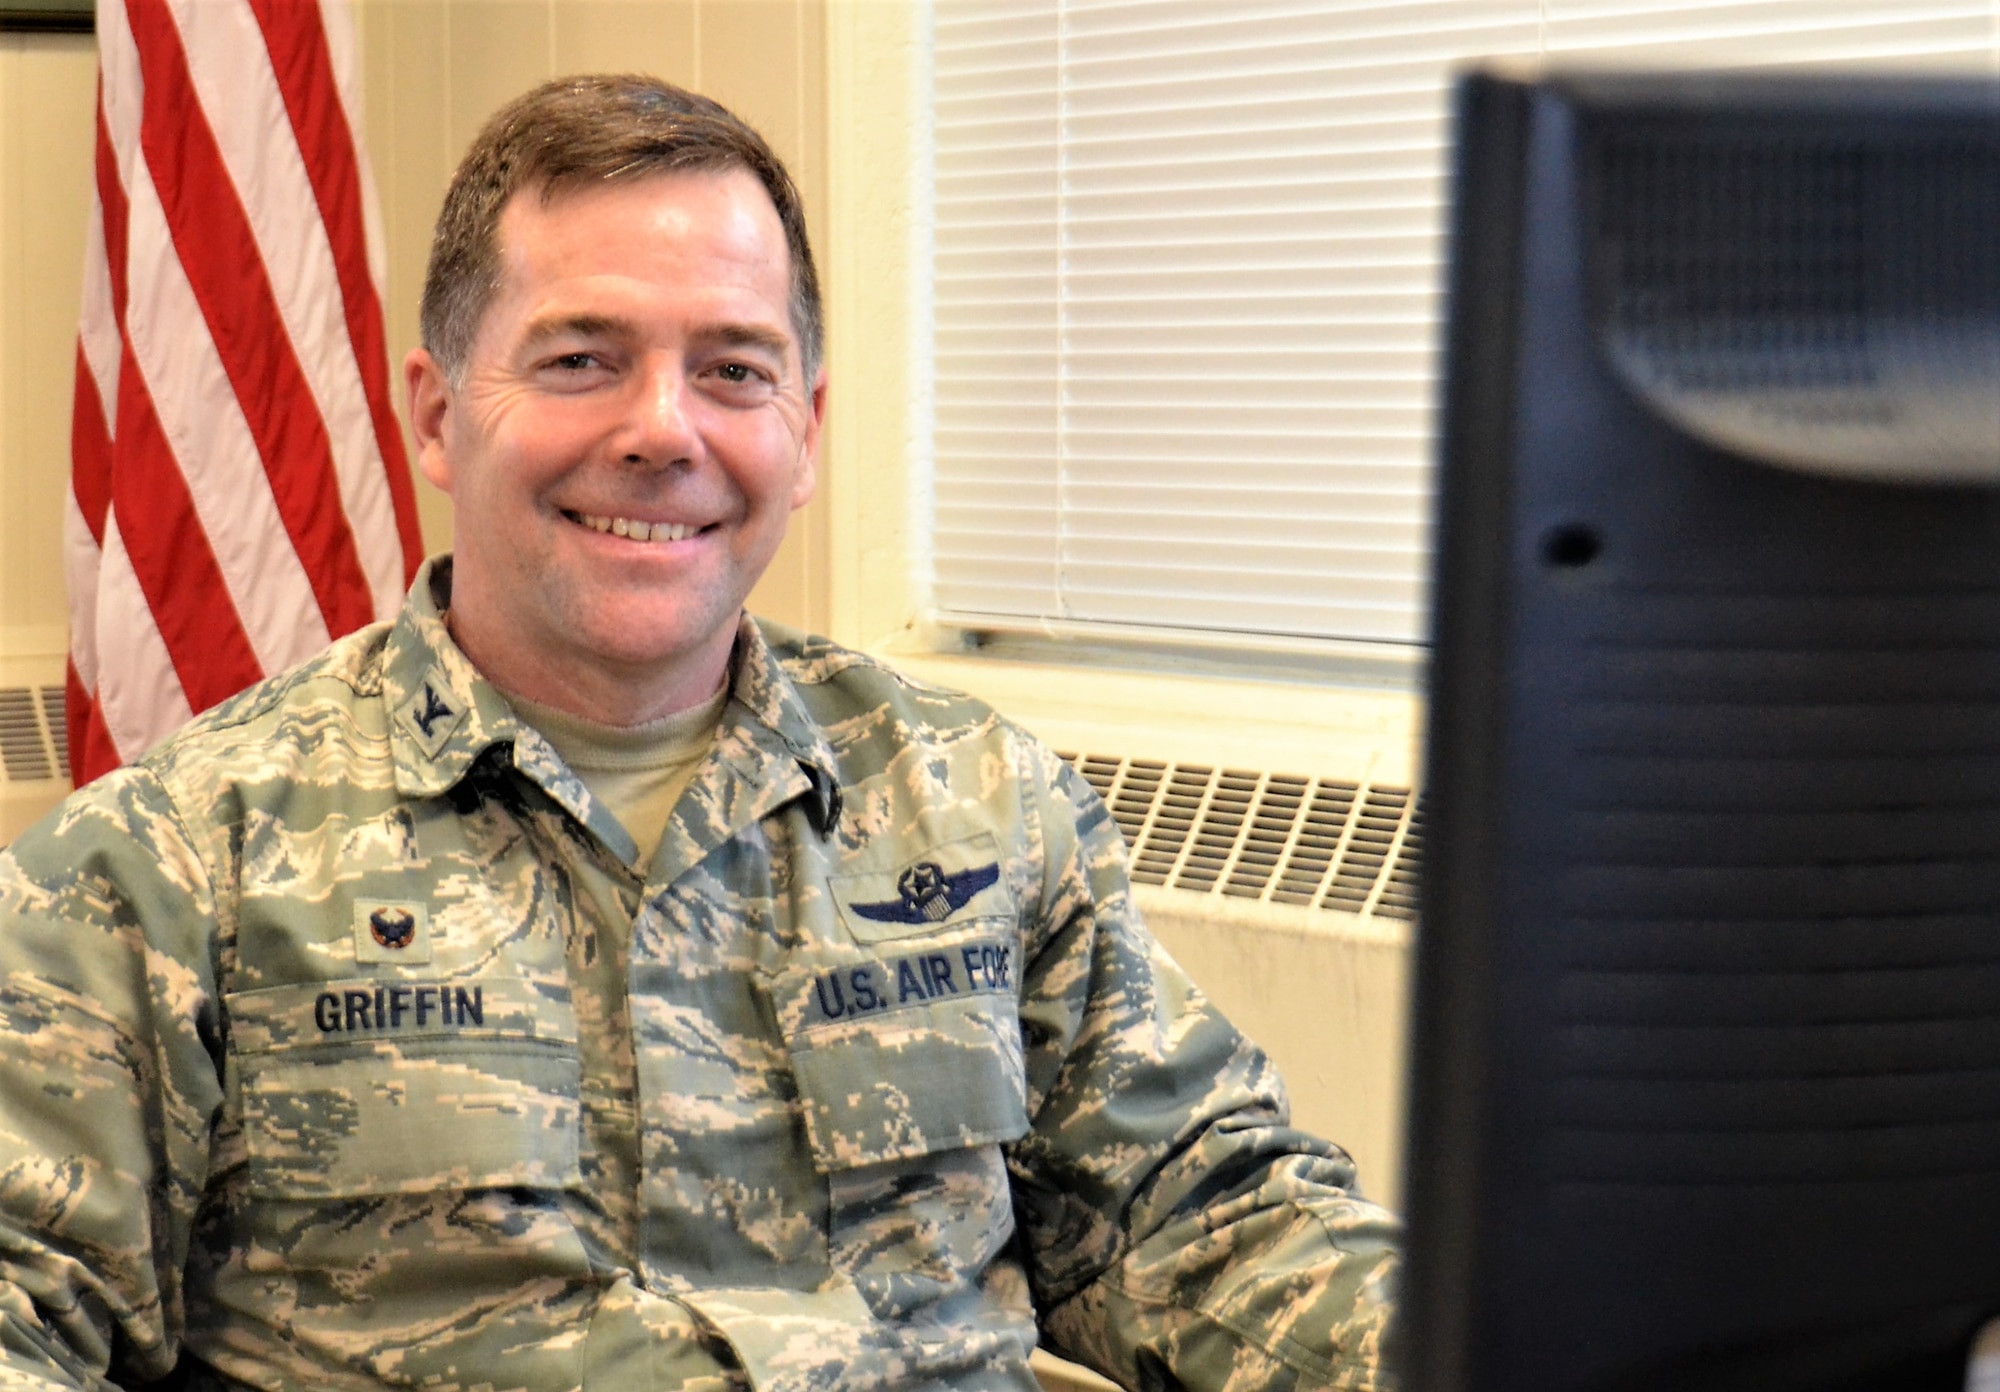 Col. Bill Griffin, 111th Attack Wing commander, takes a moment for a quick photo Feb. 7, 2018. His charge to the 111th ATKW Airmen is to impart trust and loyalty in order to remain ready and resilient. (U.S. Air National Guard photo by Tech. Sgt. Andria Allmond)